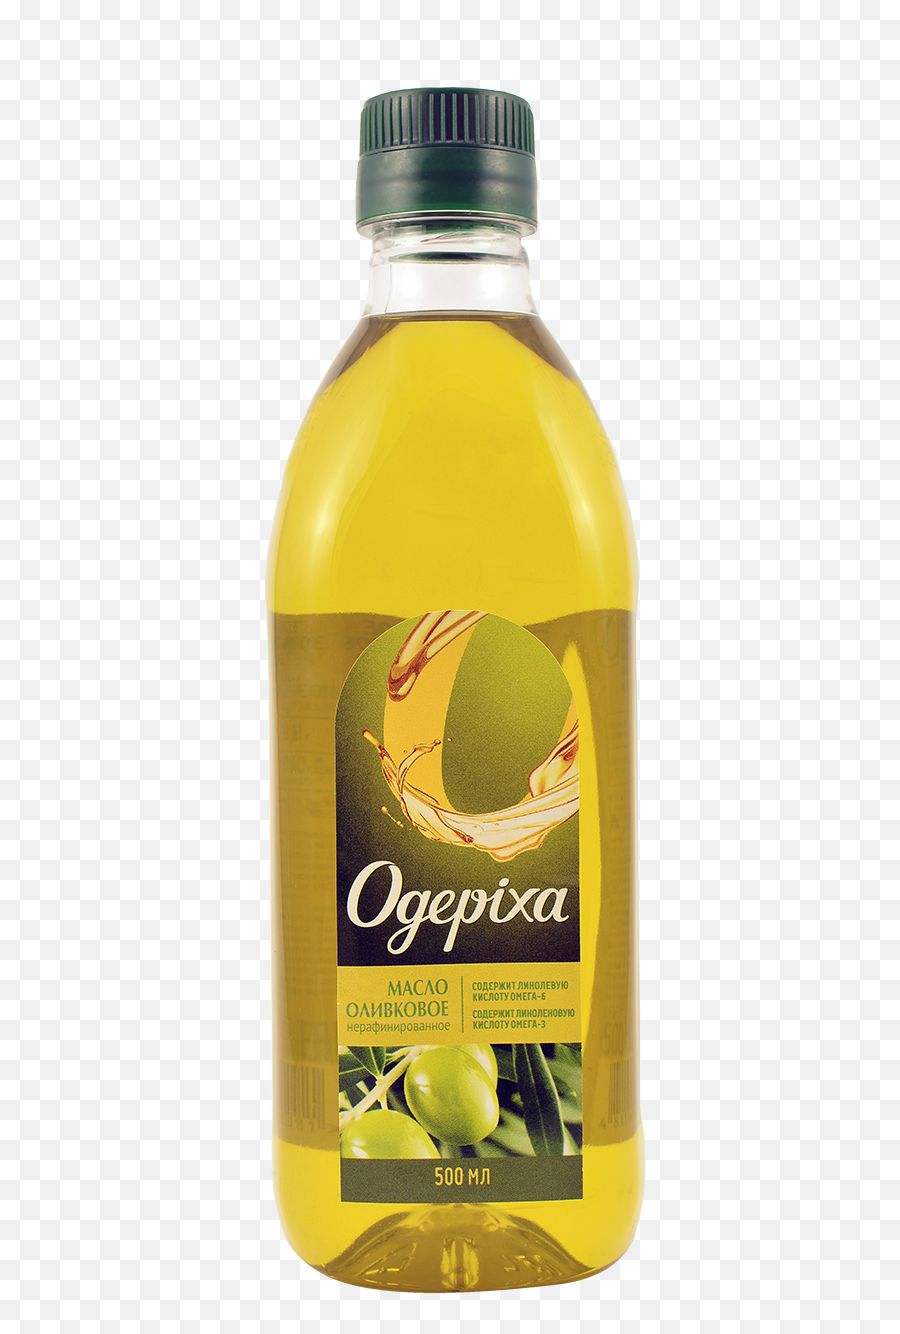 Download Olive Oil Png Image For Free - Transparent Png Olive Oil Bottle,Olive Oil Png